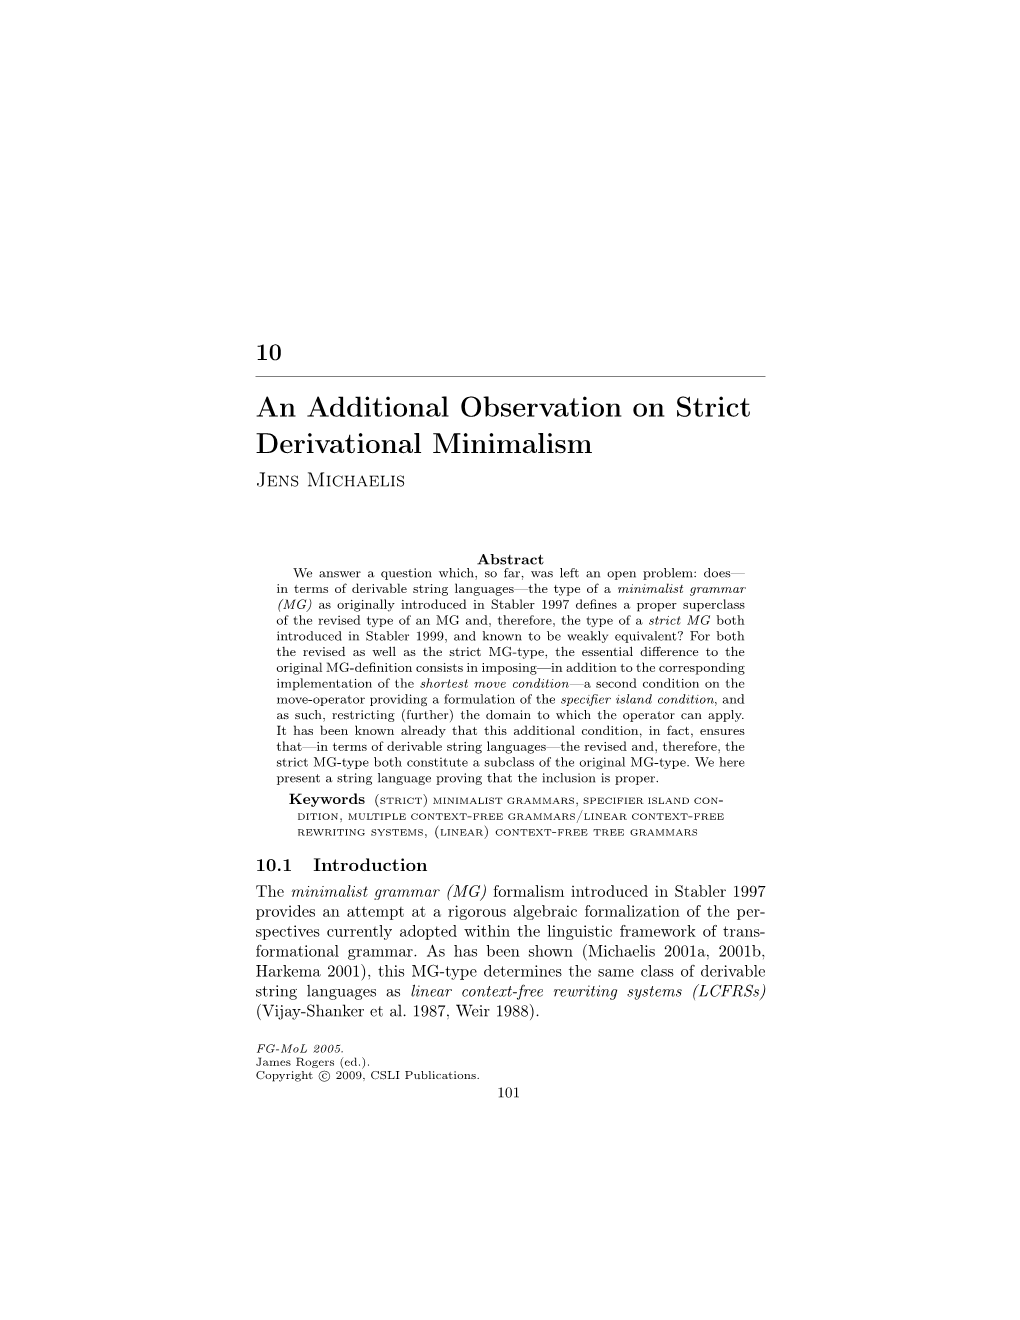 An Additional Observation on Strict Derivational Minimalism Jens Michaelis